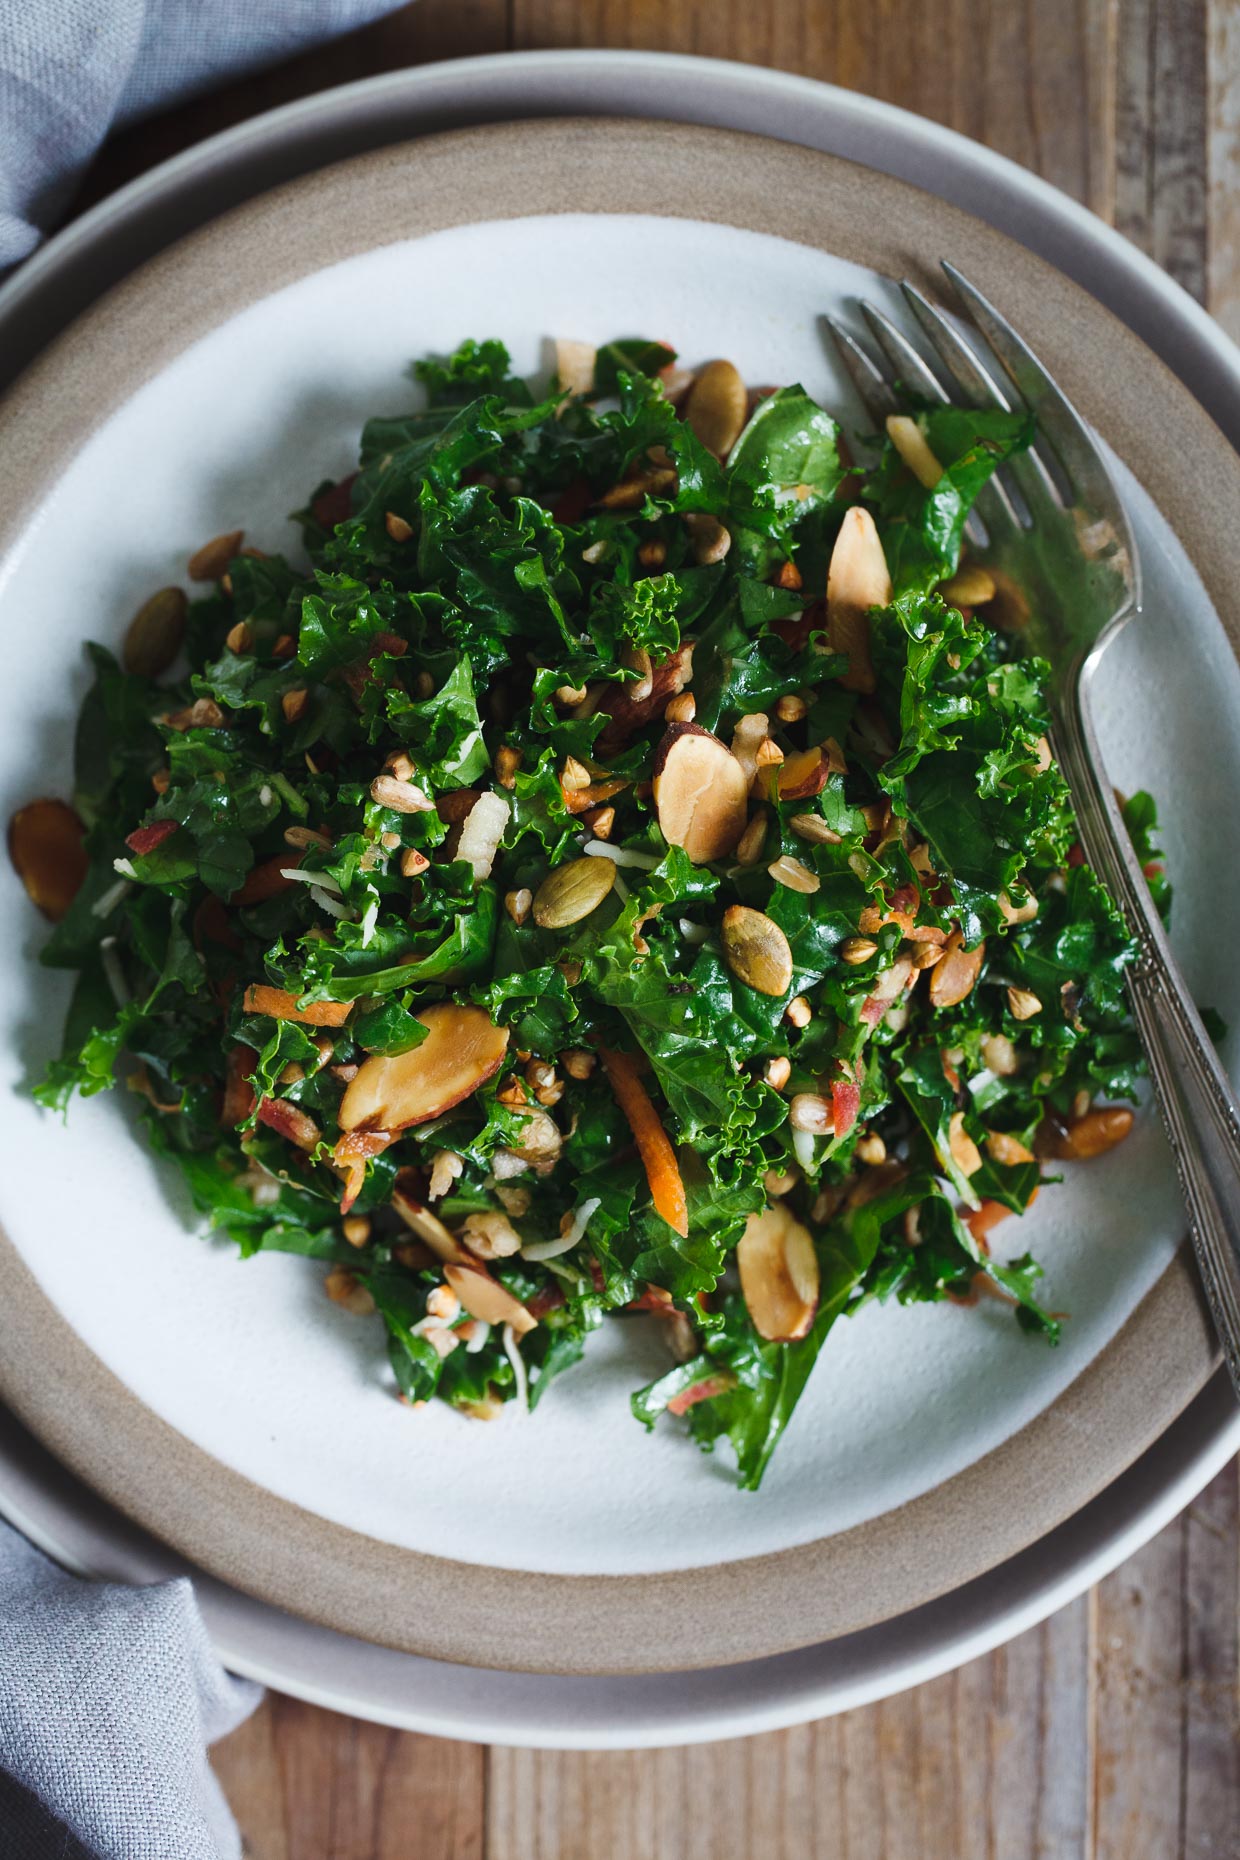 Kale Salad with Toasted Nuts, Seeds and Buckwheat